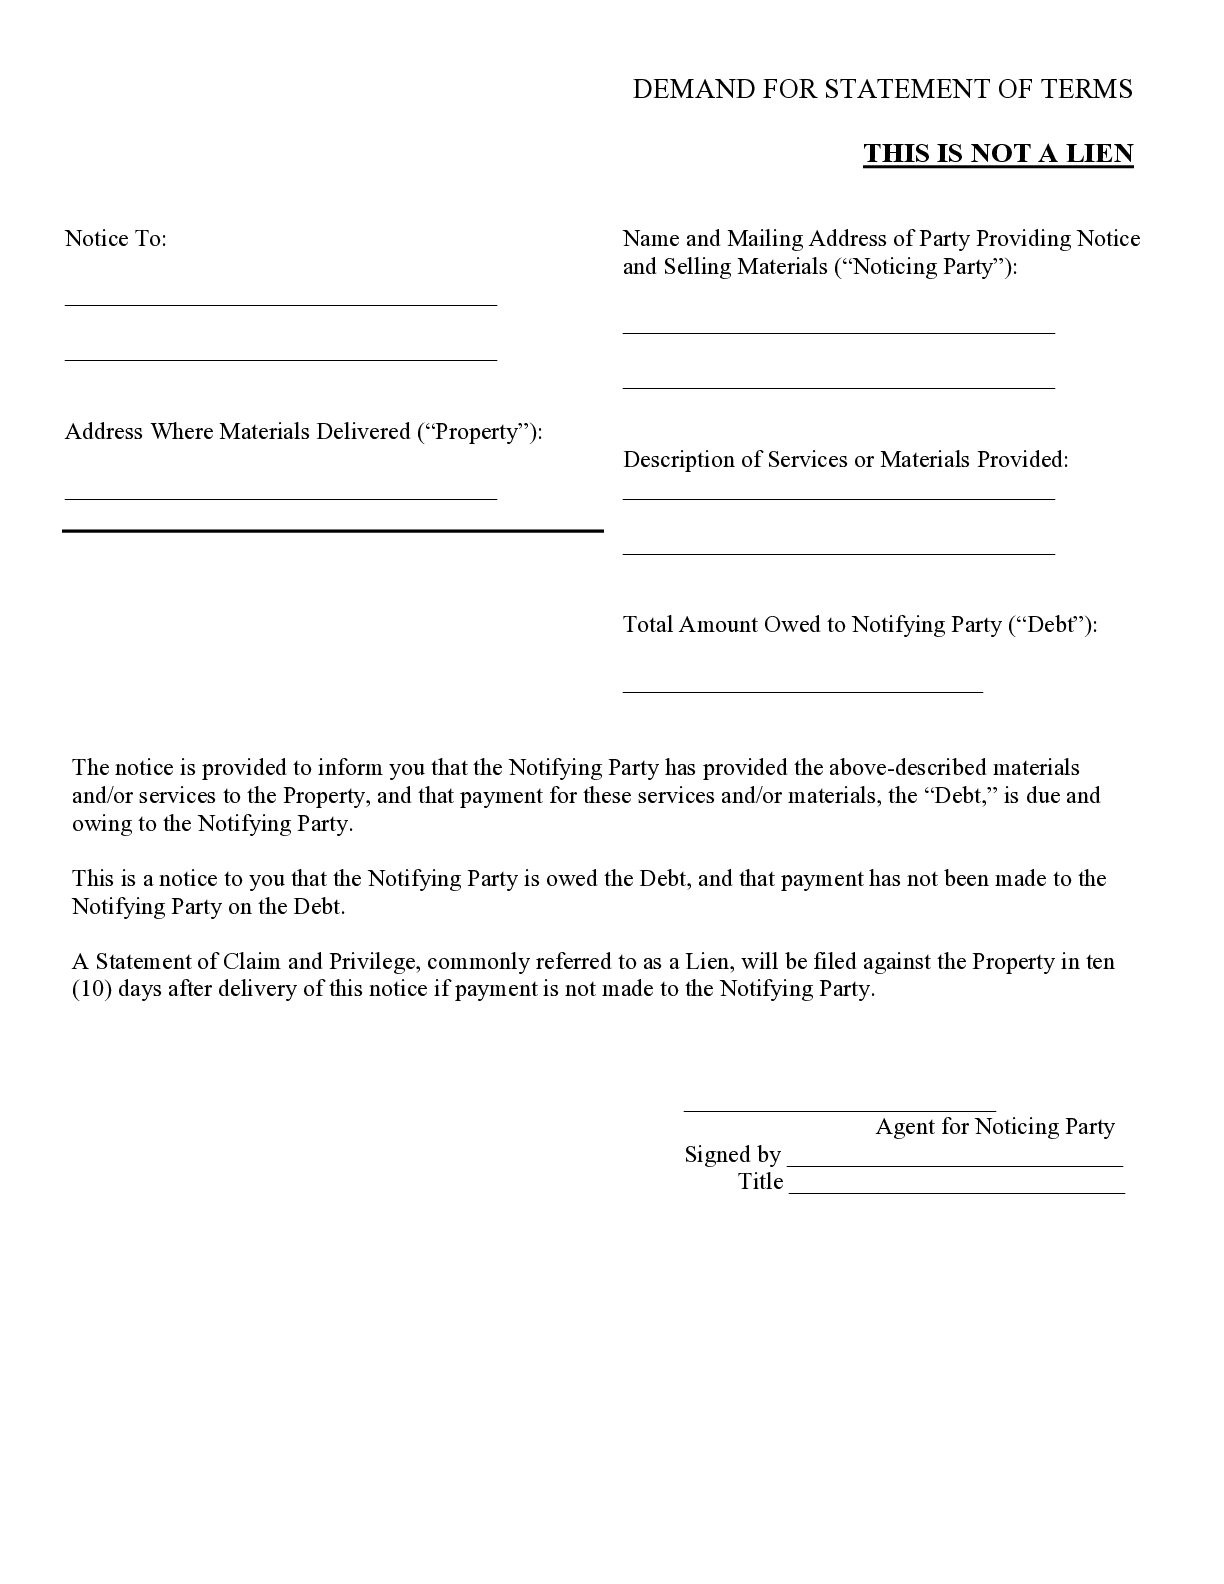 Louisiana Notice of Intent to Lien Form (Final Notice of Nonpayment) | Free Downloadable Template